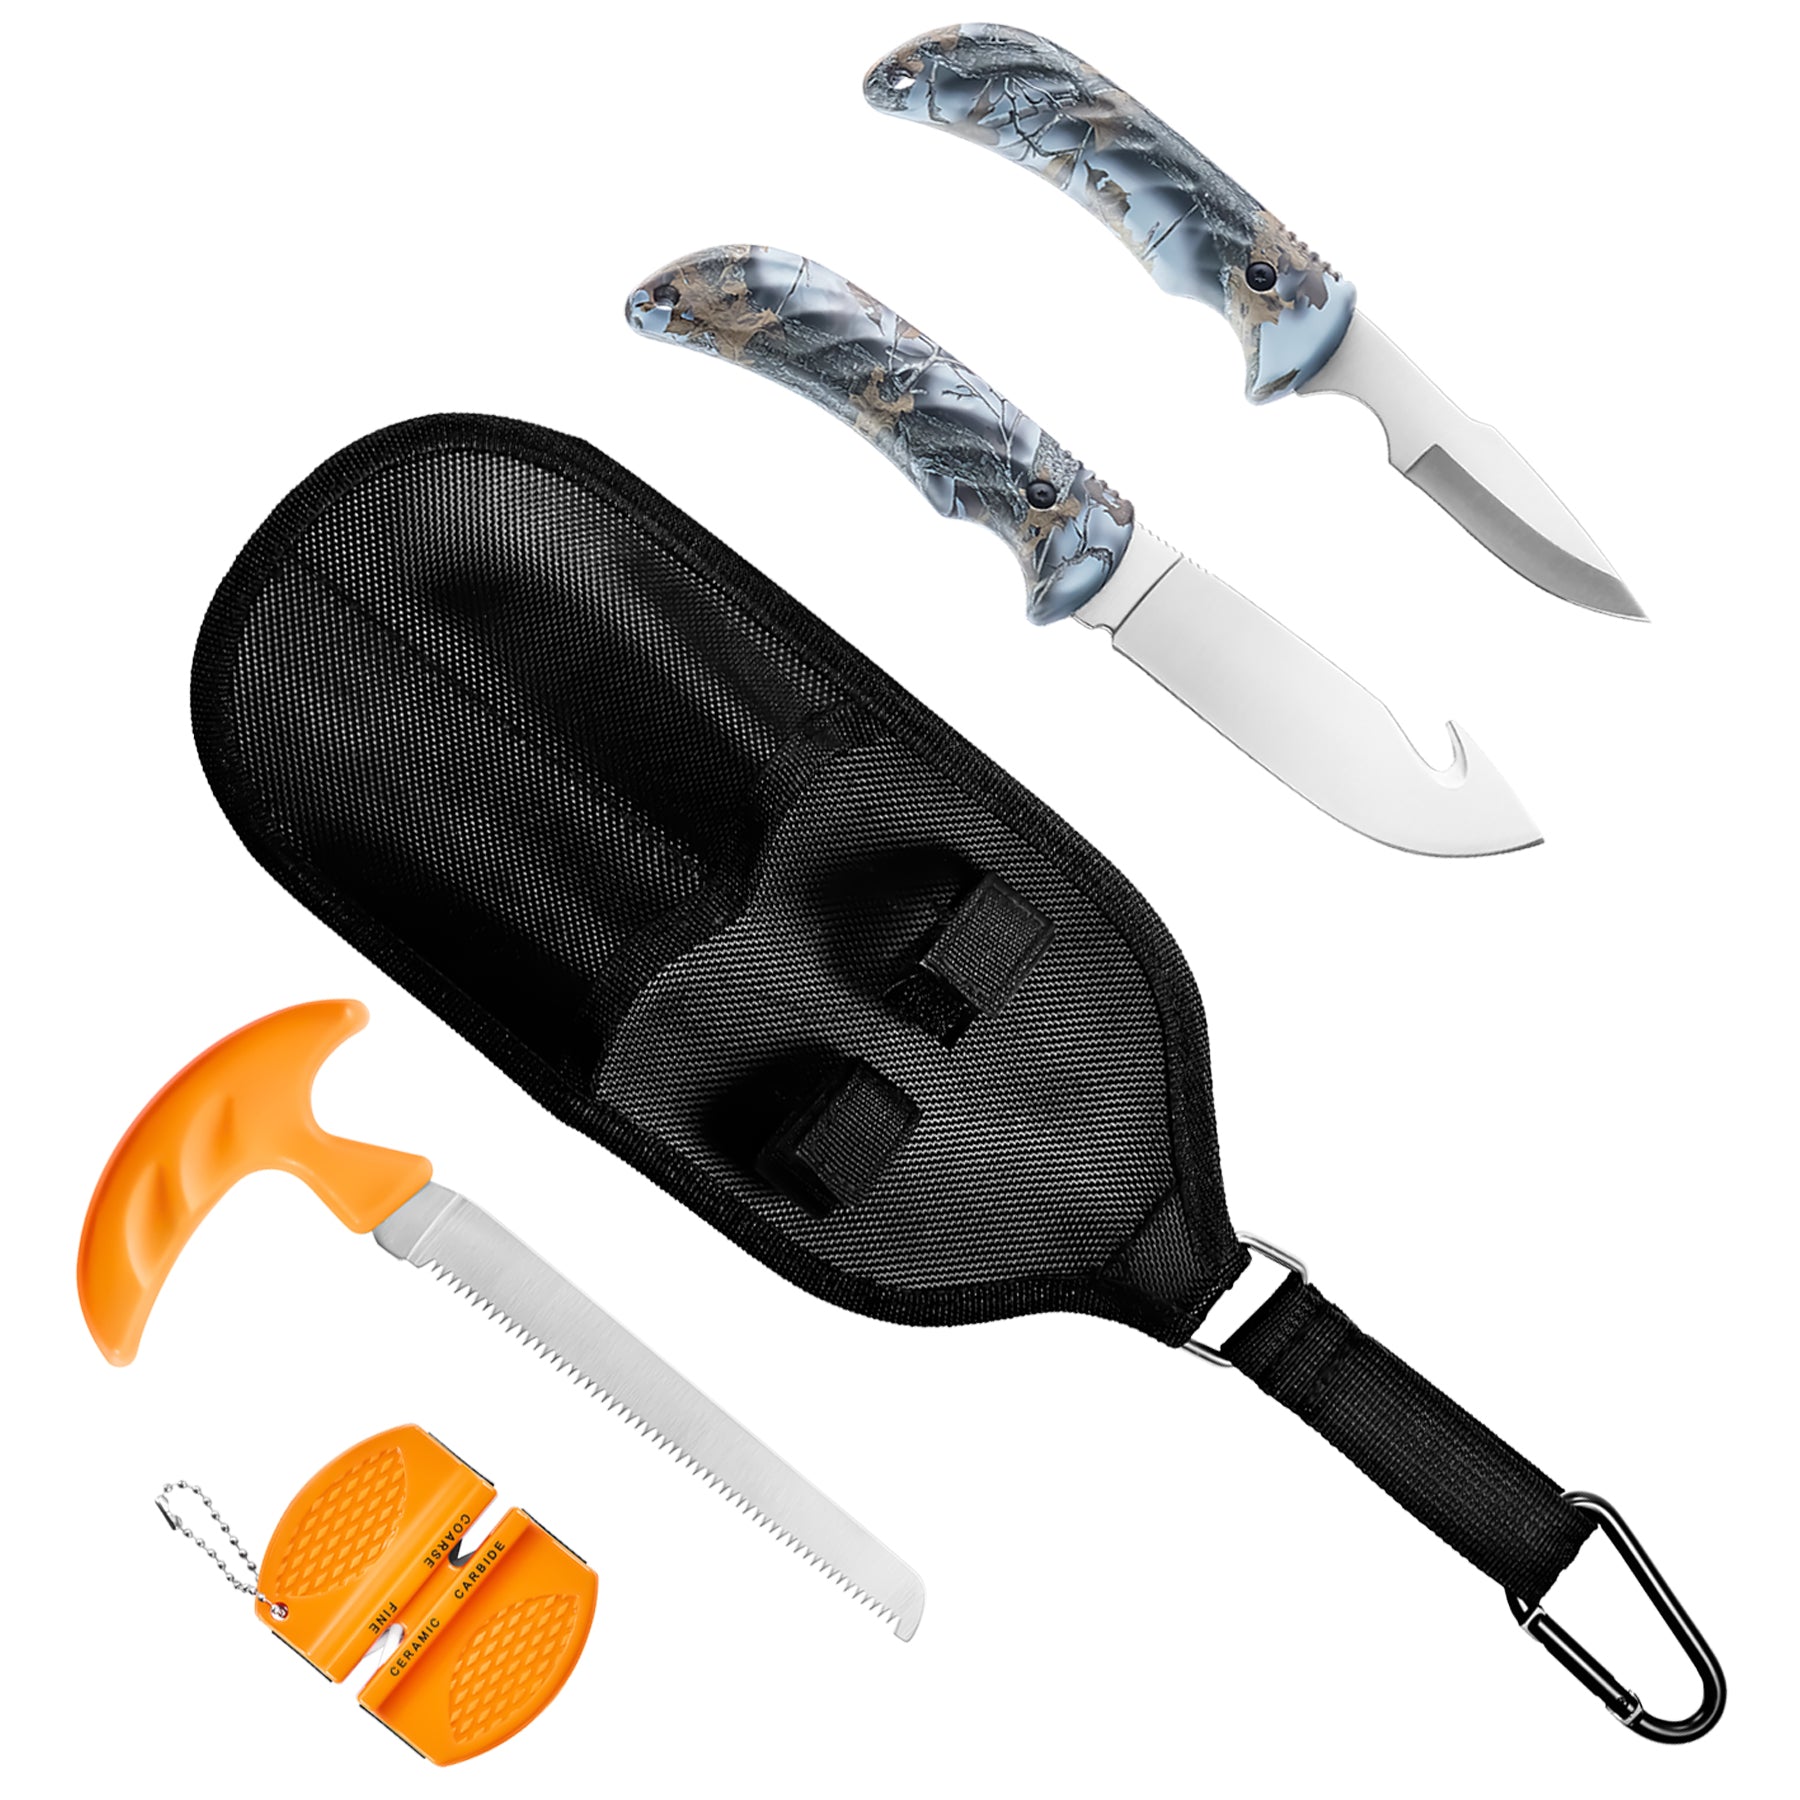 4-piece Hunting Knife and Saw Combo Set, Gut-hook Skinner, Fixed